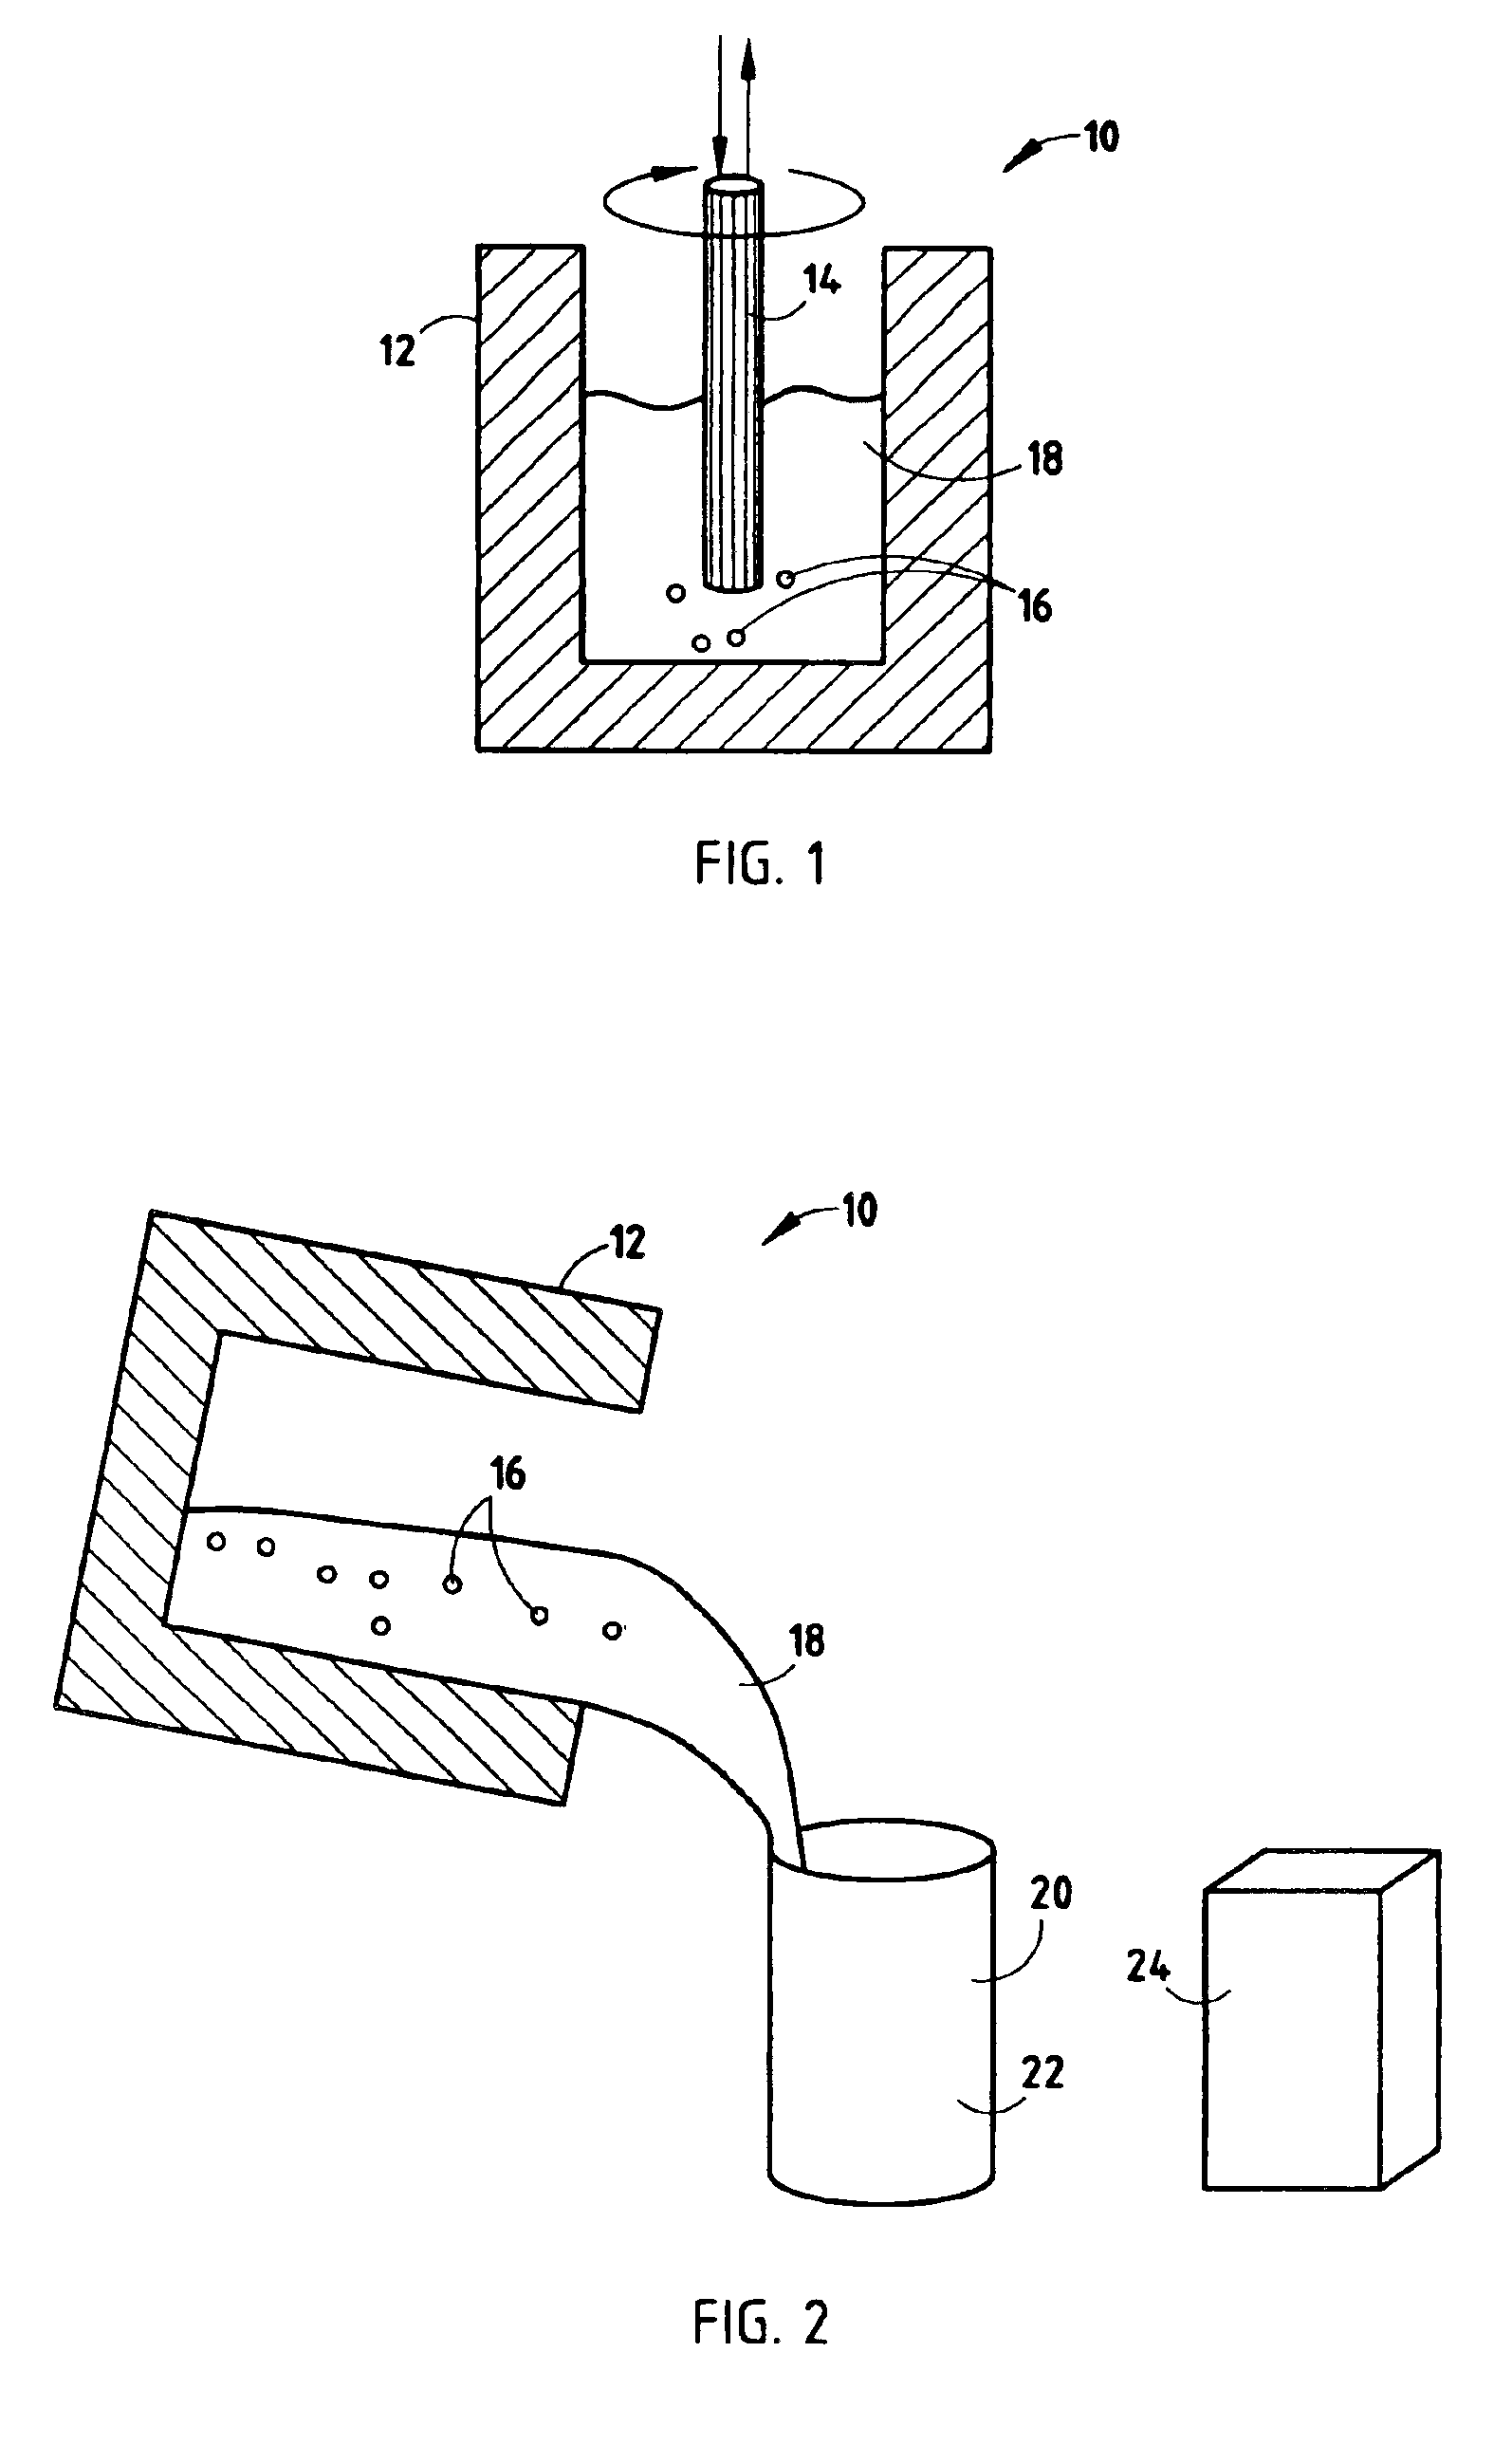 Process and apparatus for preparing a metal alloy